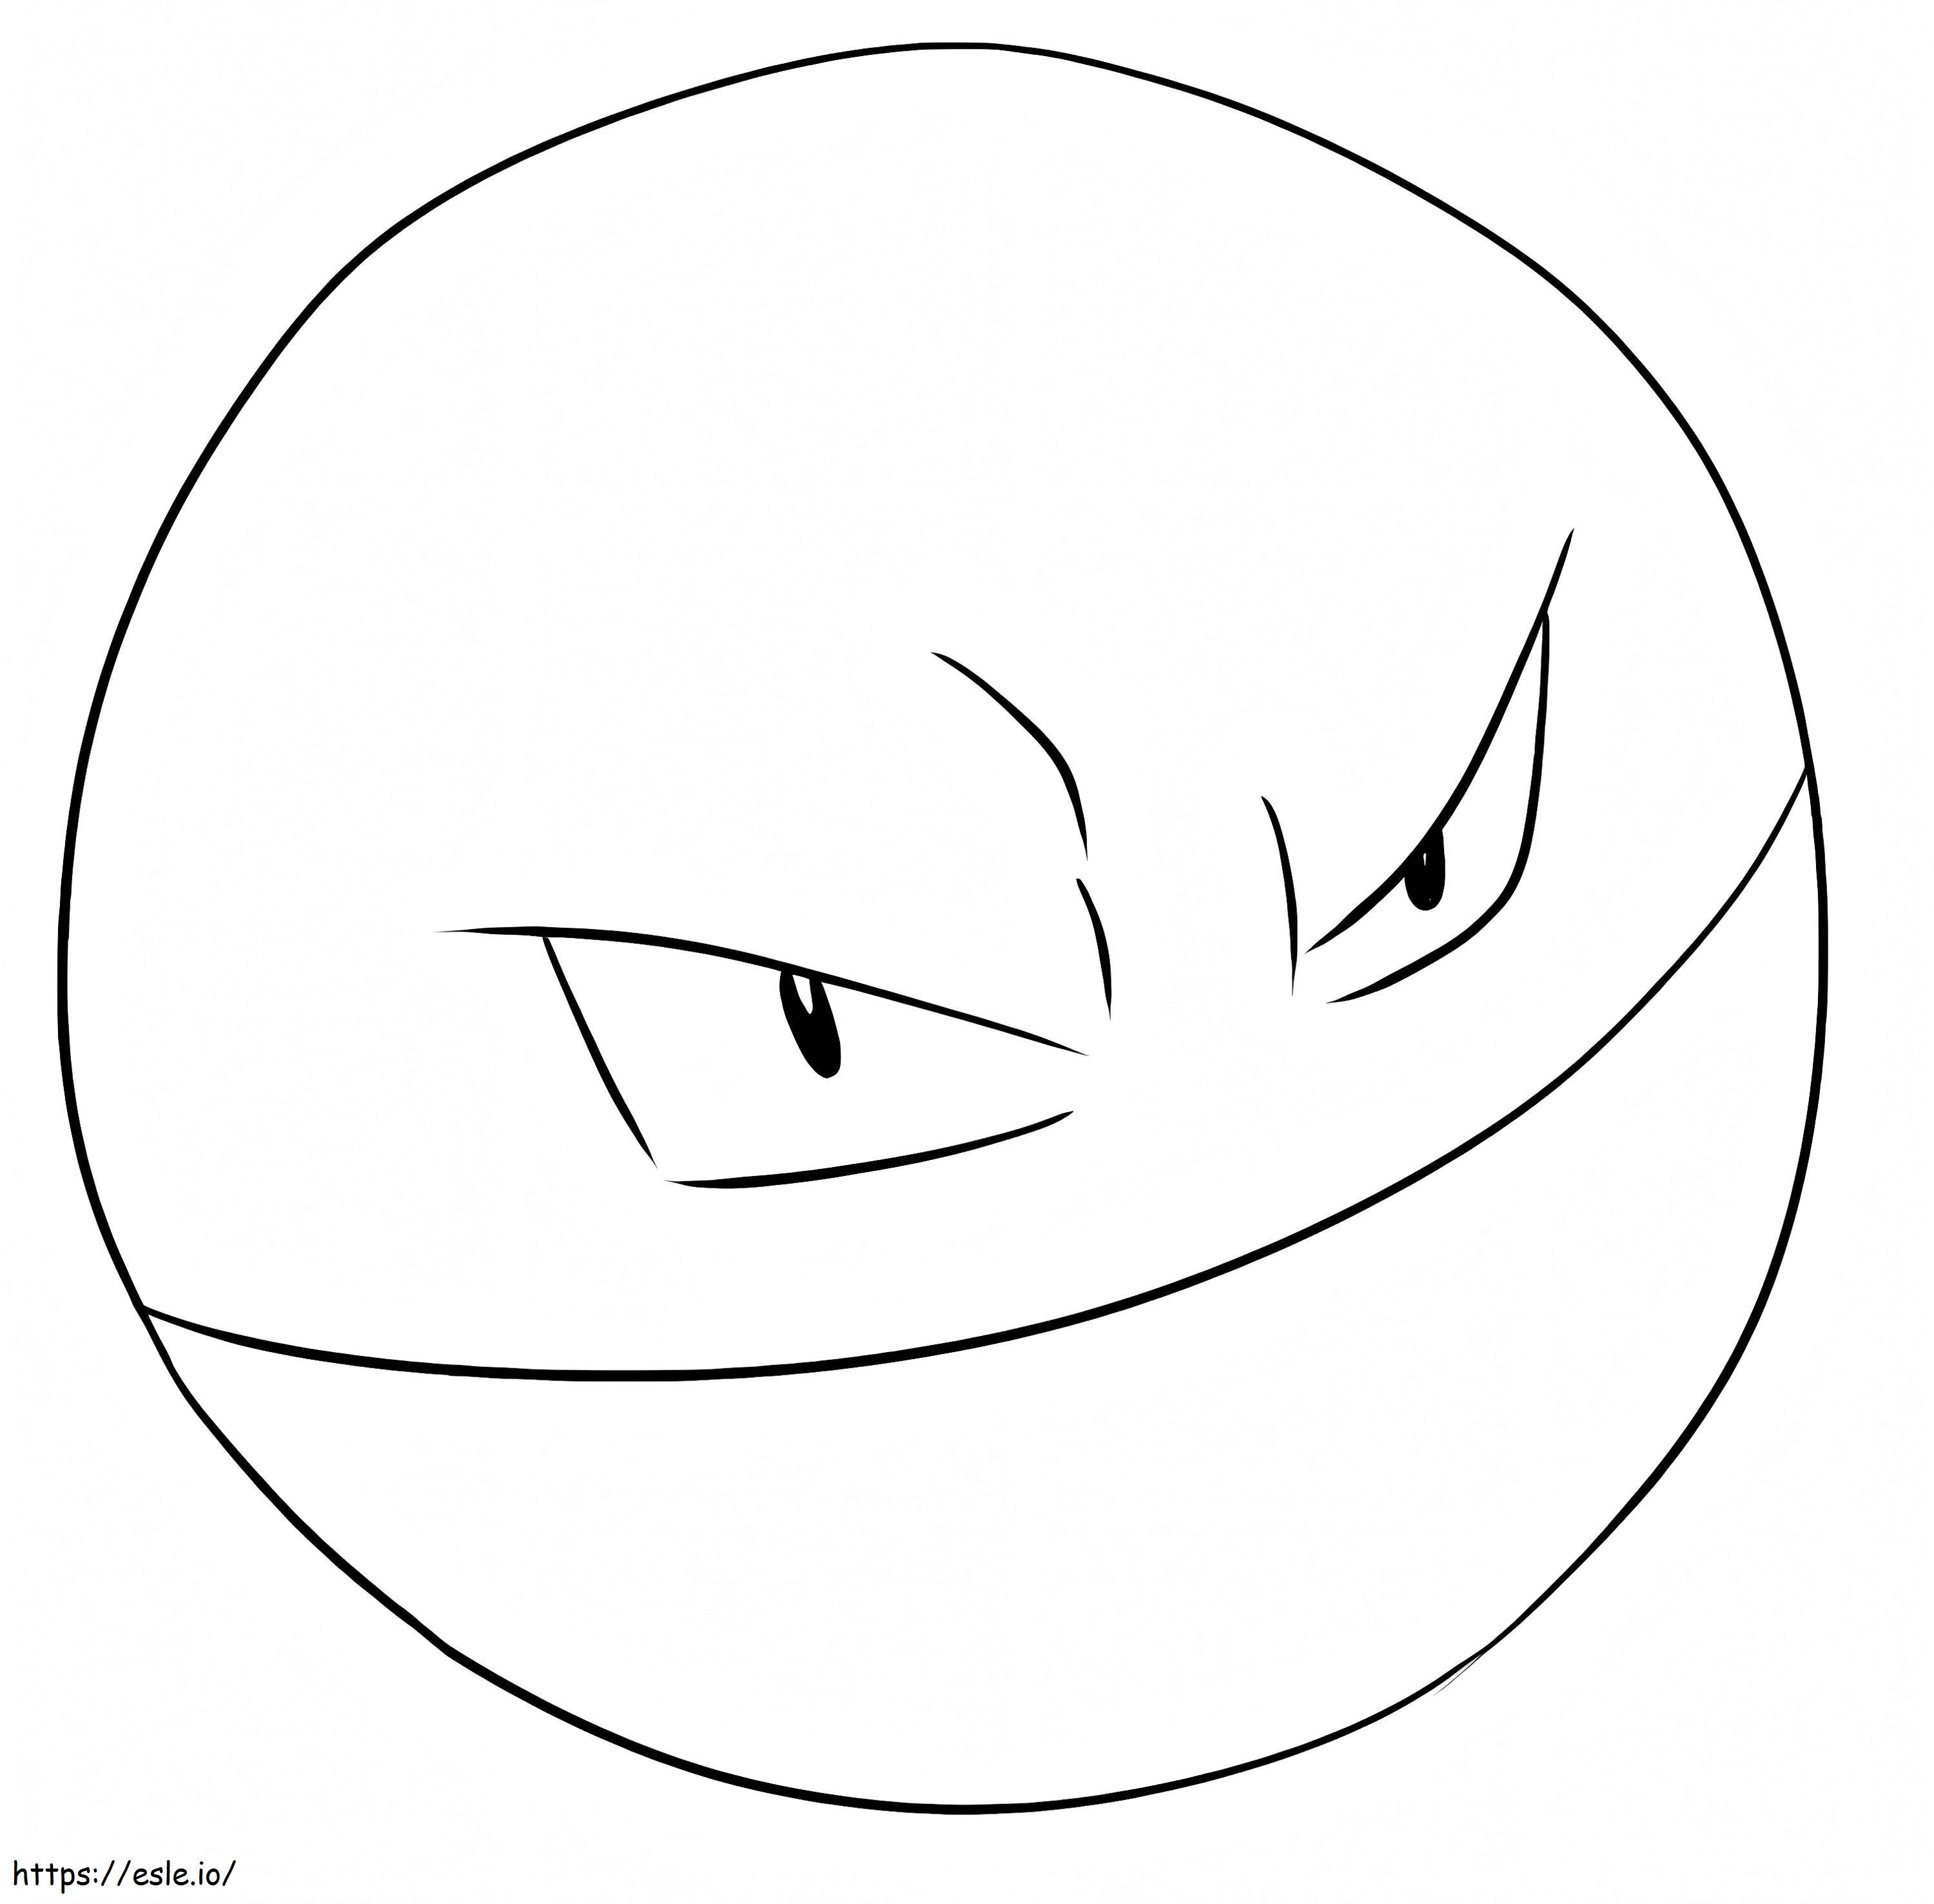 Voltorb 1 coloring page